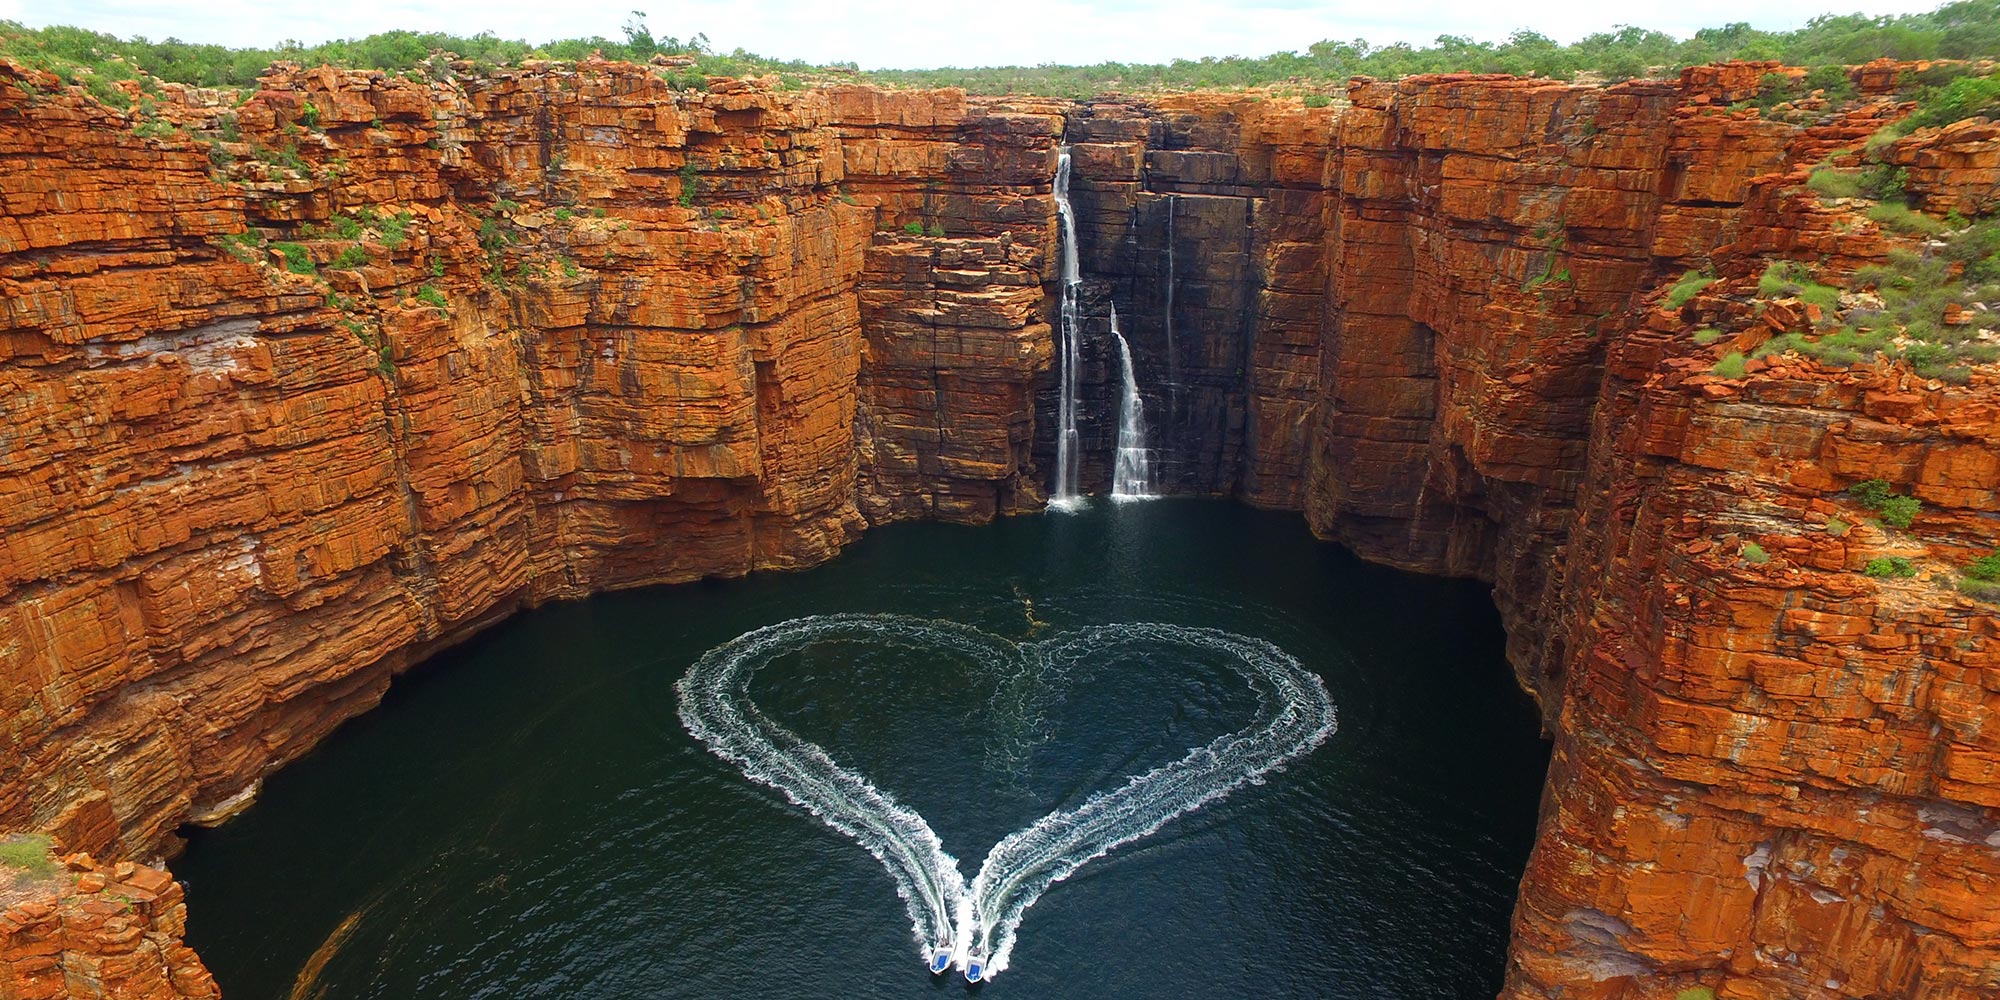 Aerial view of two tenders making a heart shape with the wake of the boats